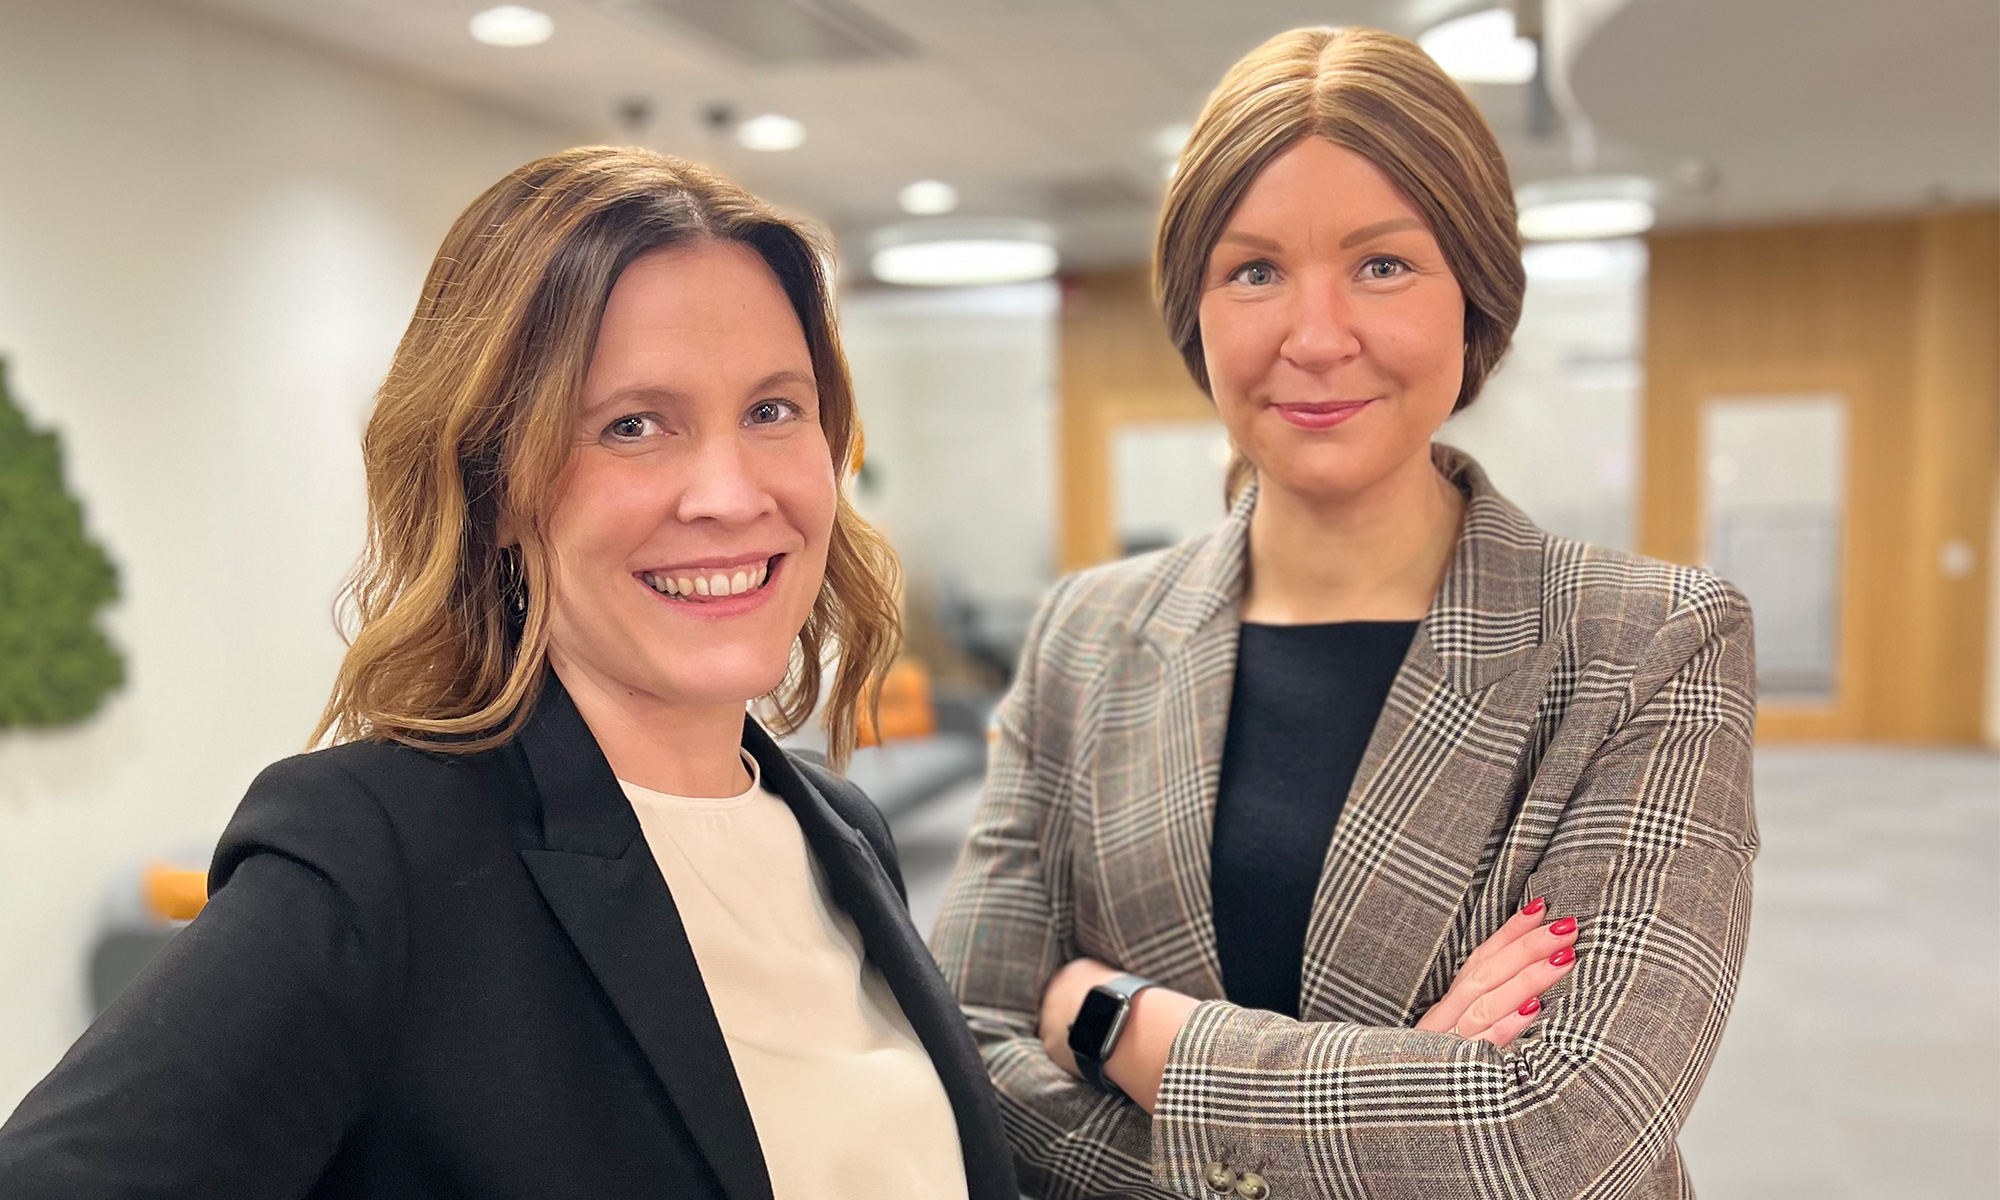 Two confident women standing in office landscape